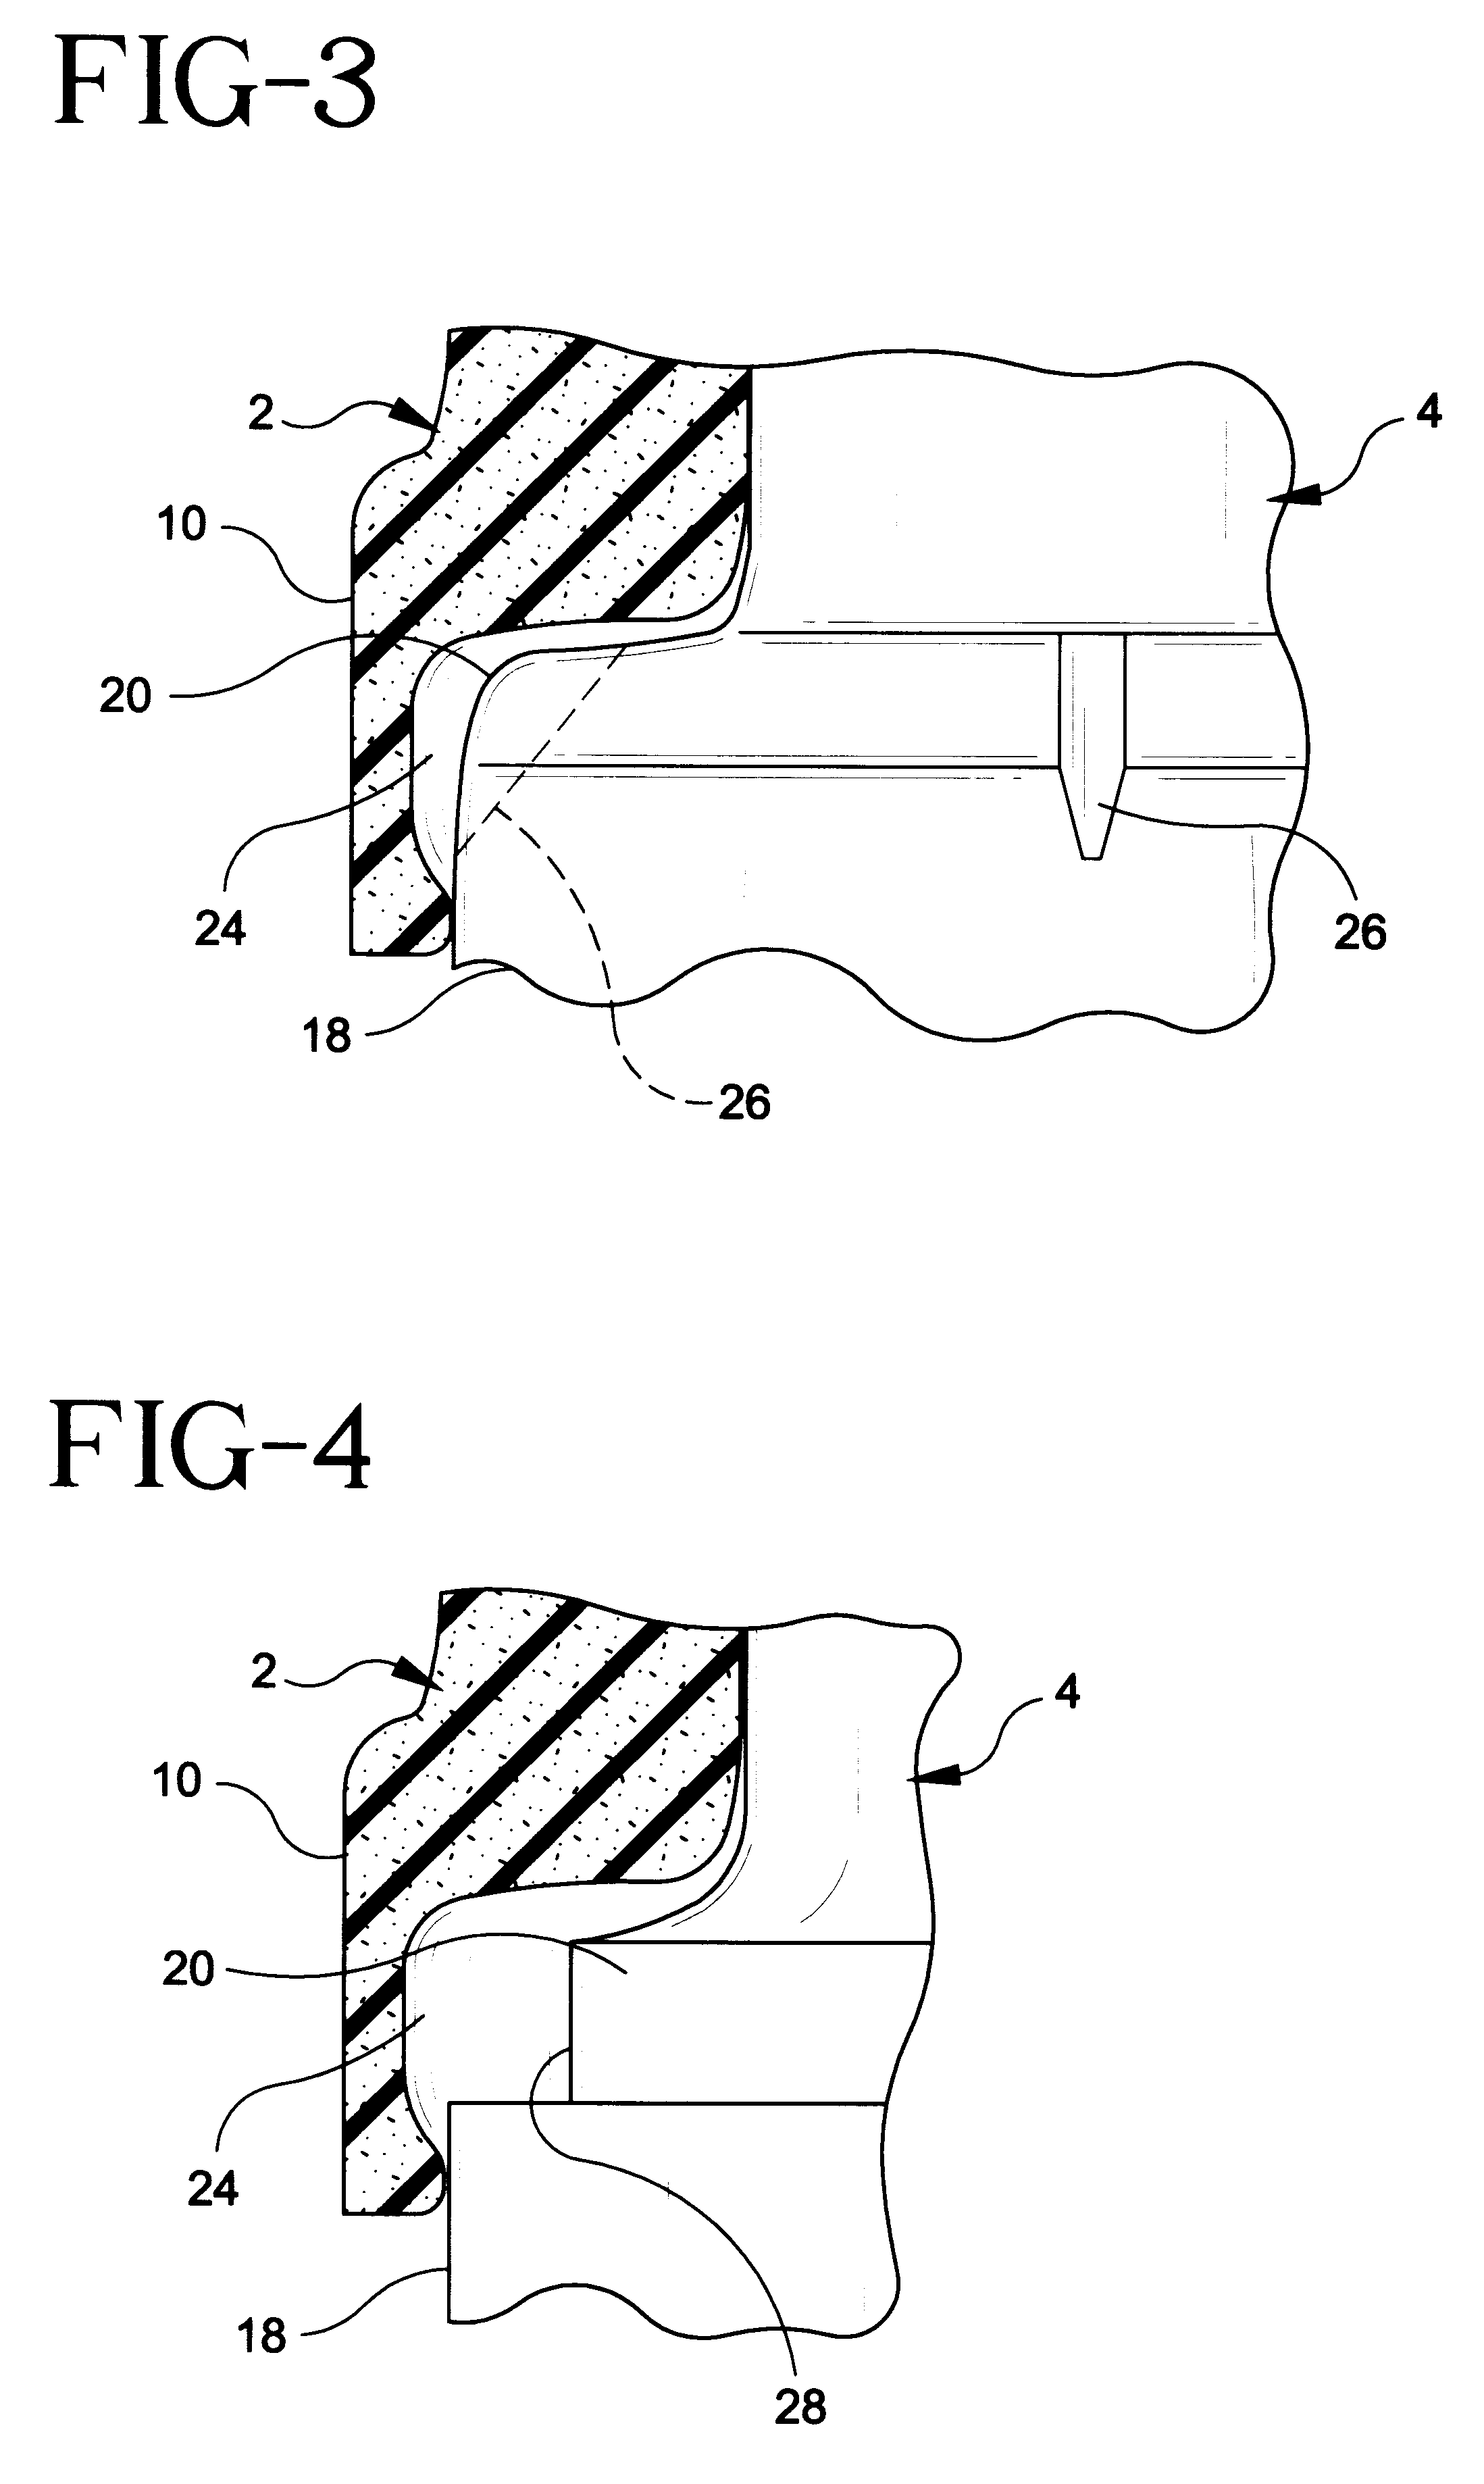 Loadbreak connector assembly which prevents switching flashover